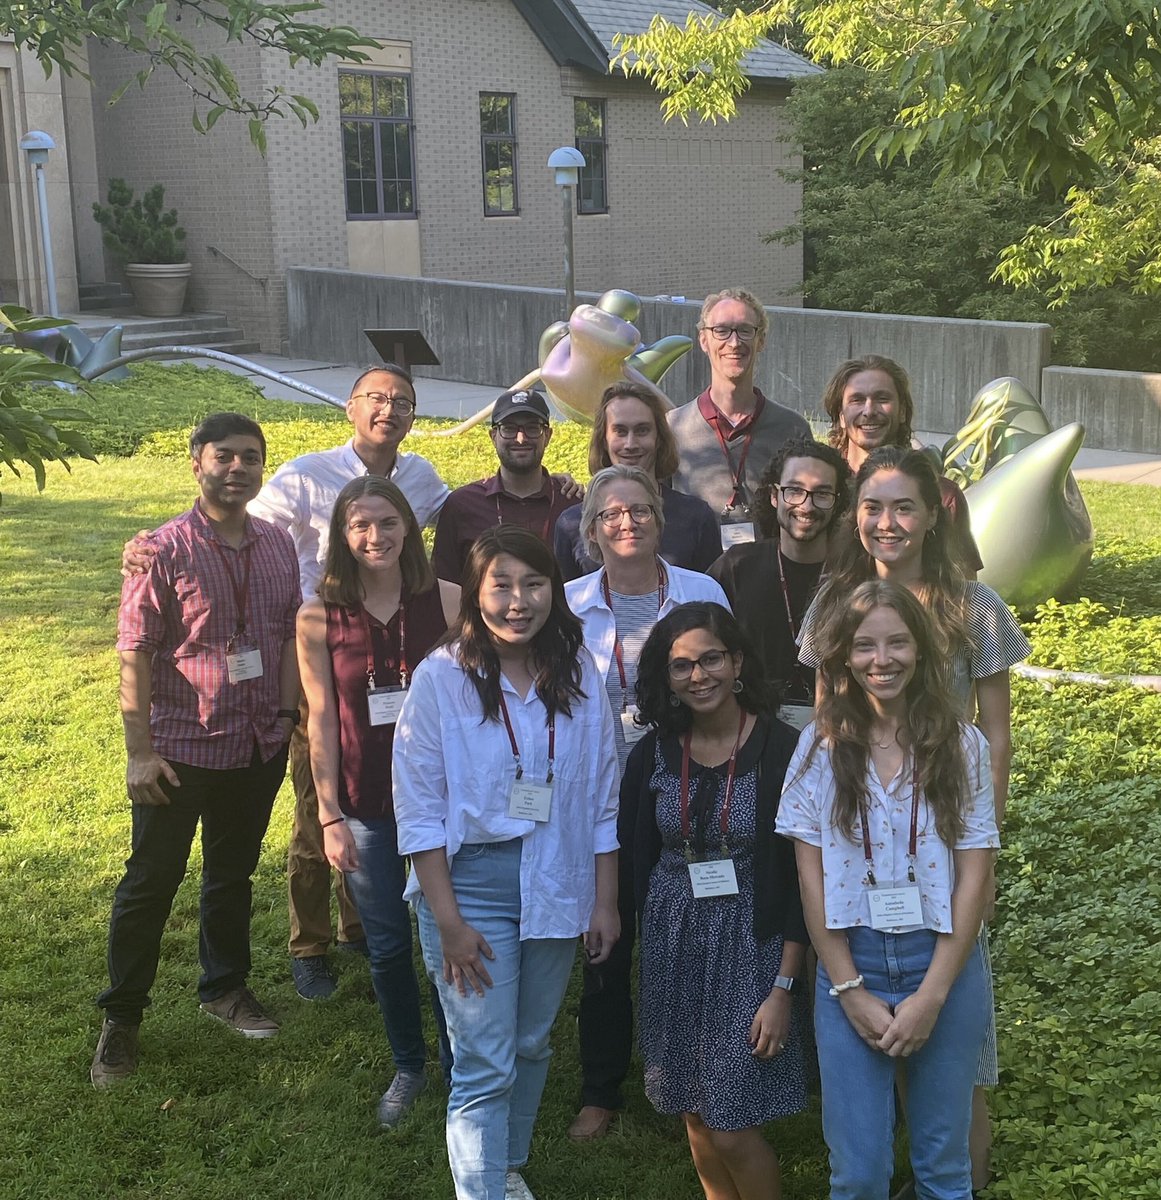 Group pic by the polysome at translational control 2022. Ribosome is life! #cshltranscon